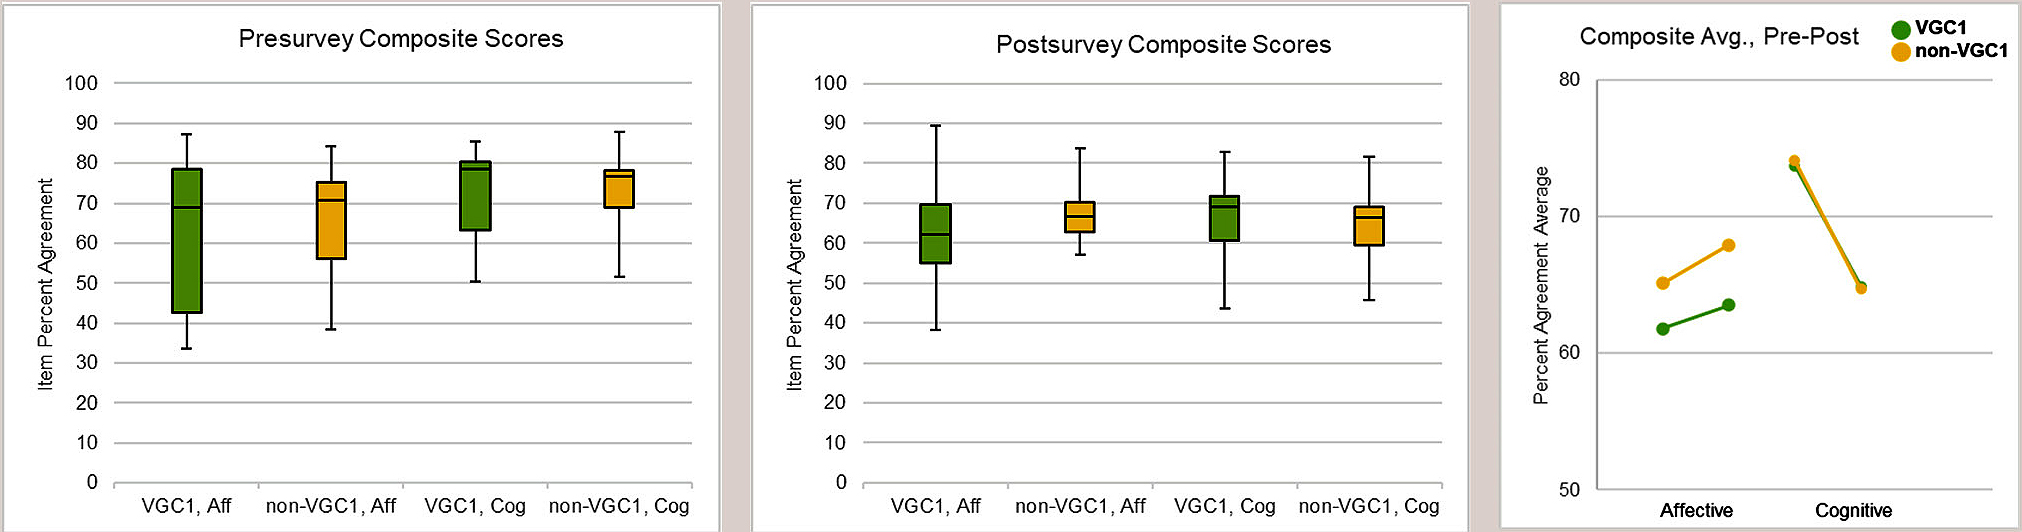 Figure 2 Visualizations of pre-post composite scores for both groups.